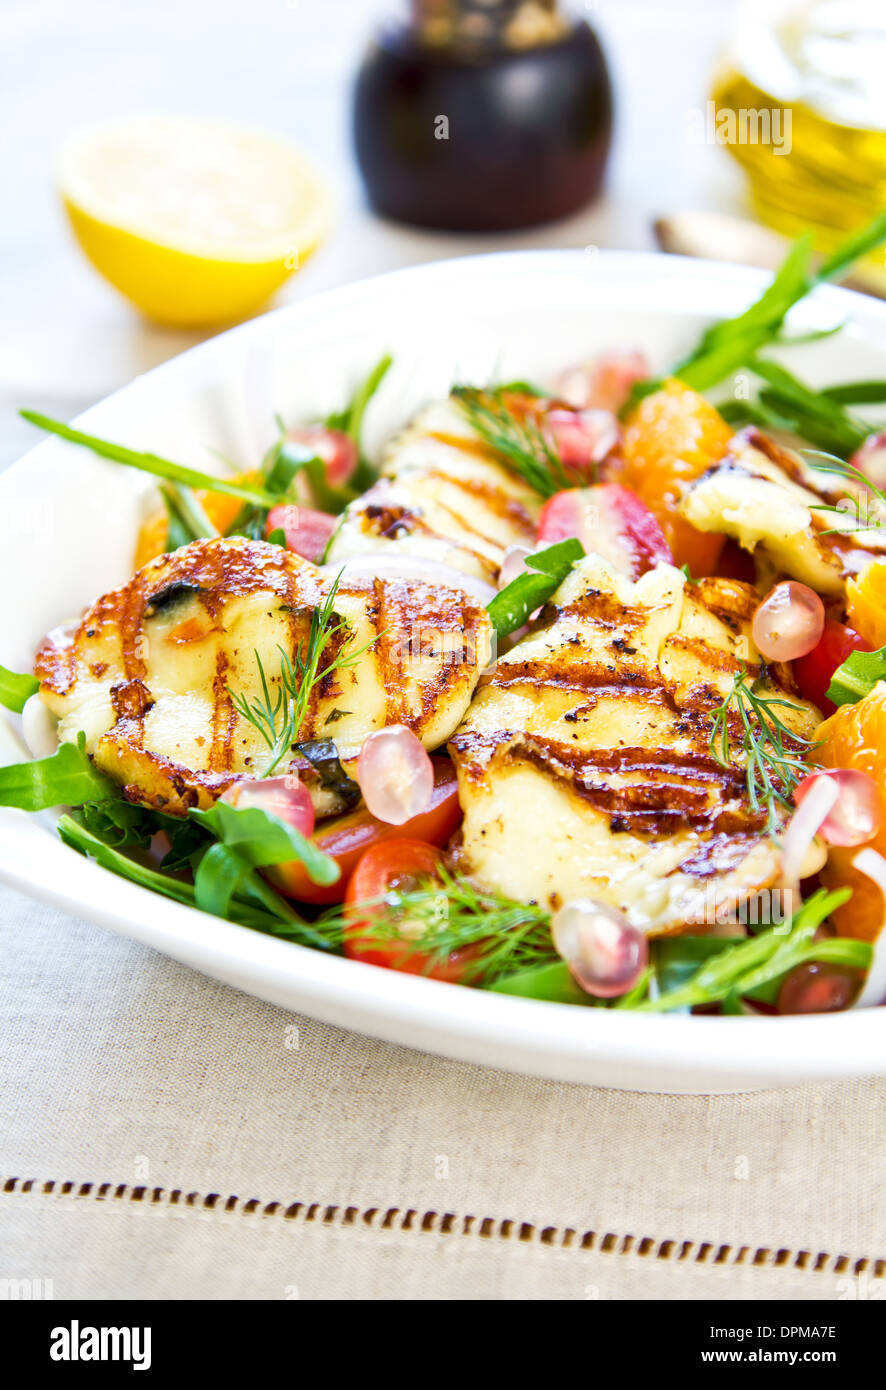 Grilled Halloumi with Pomegranate,Orange and Rocket salad Stock Photo